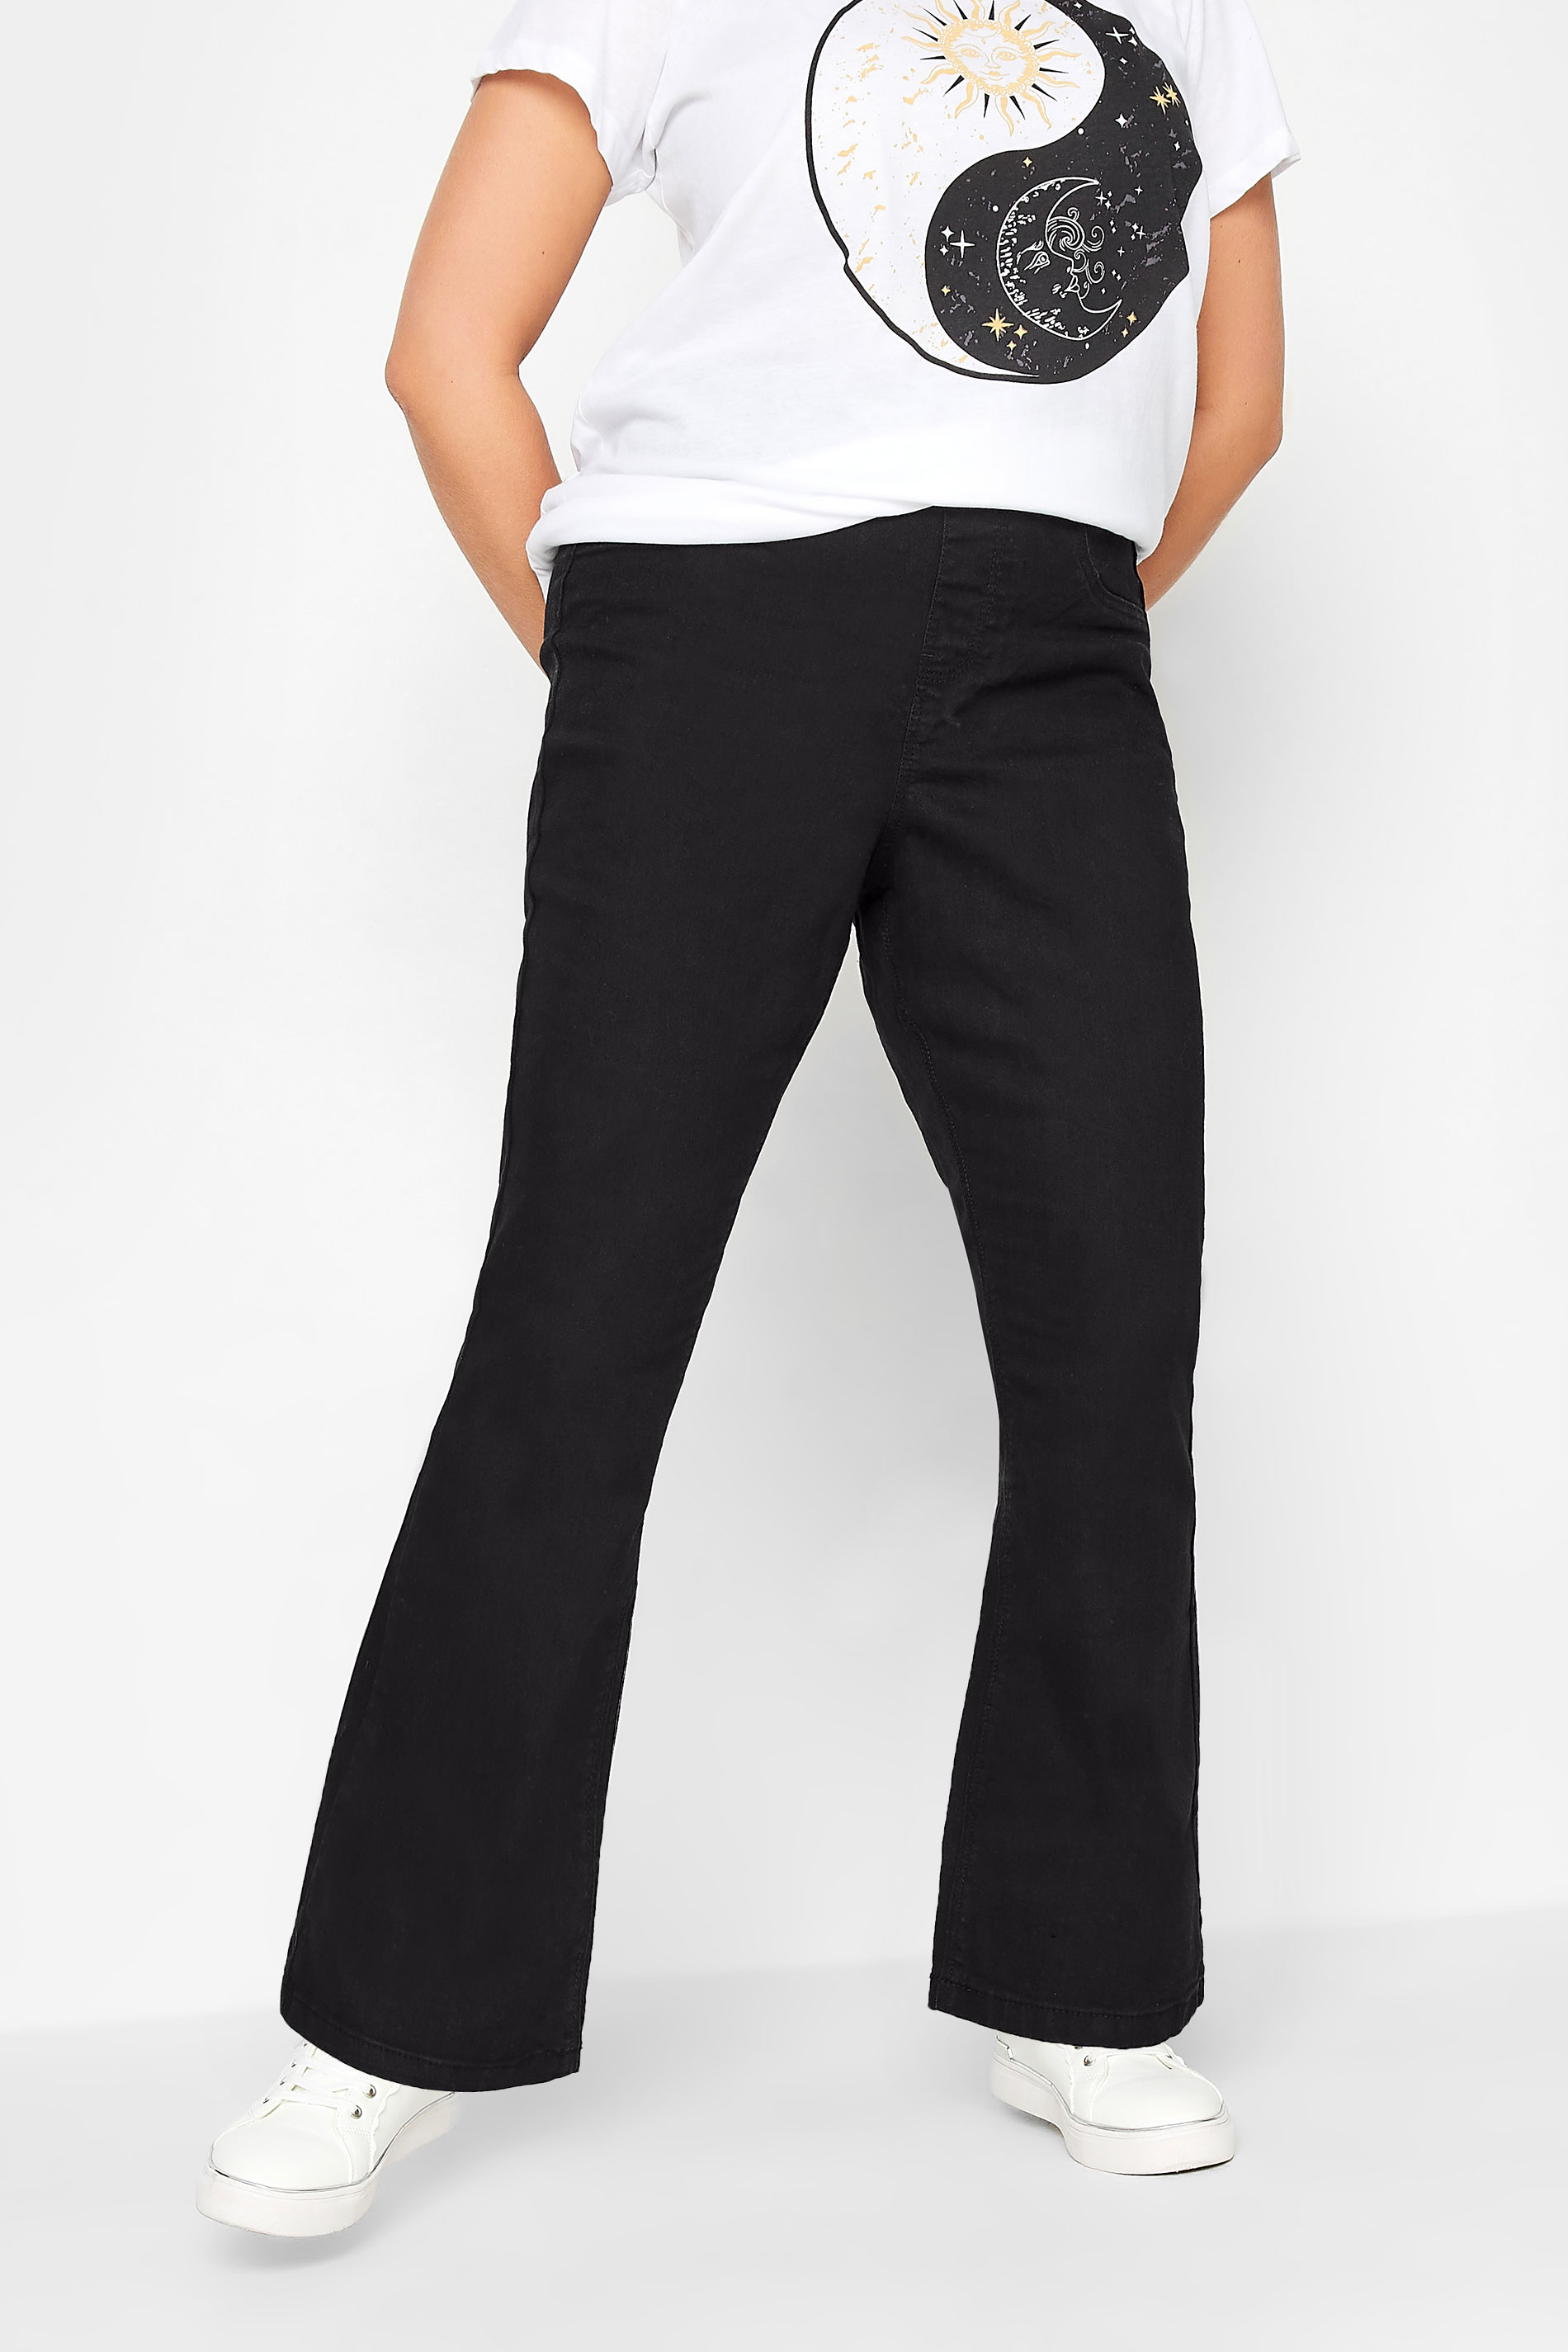 Plus Size Black Pull-On HANNAH Bootcut Jeggings | Yours Clothing 1